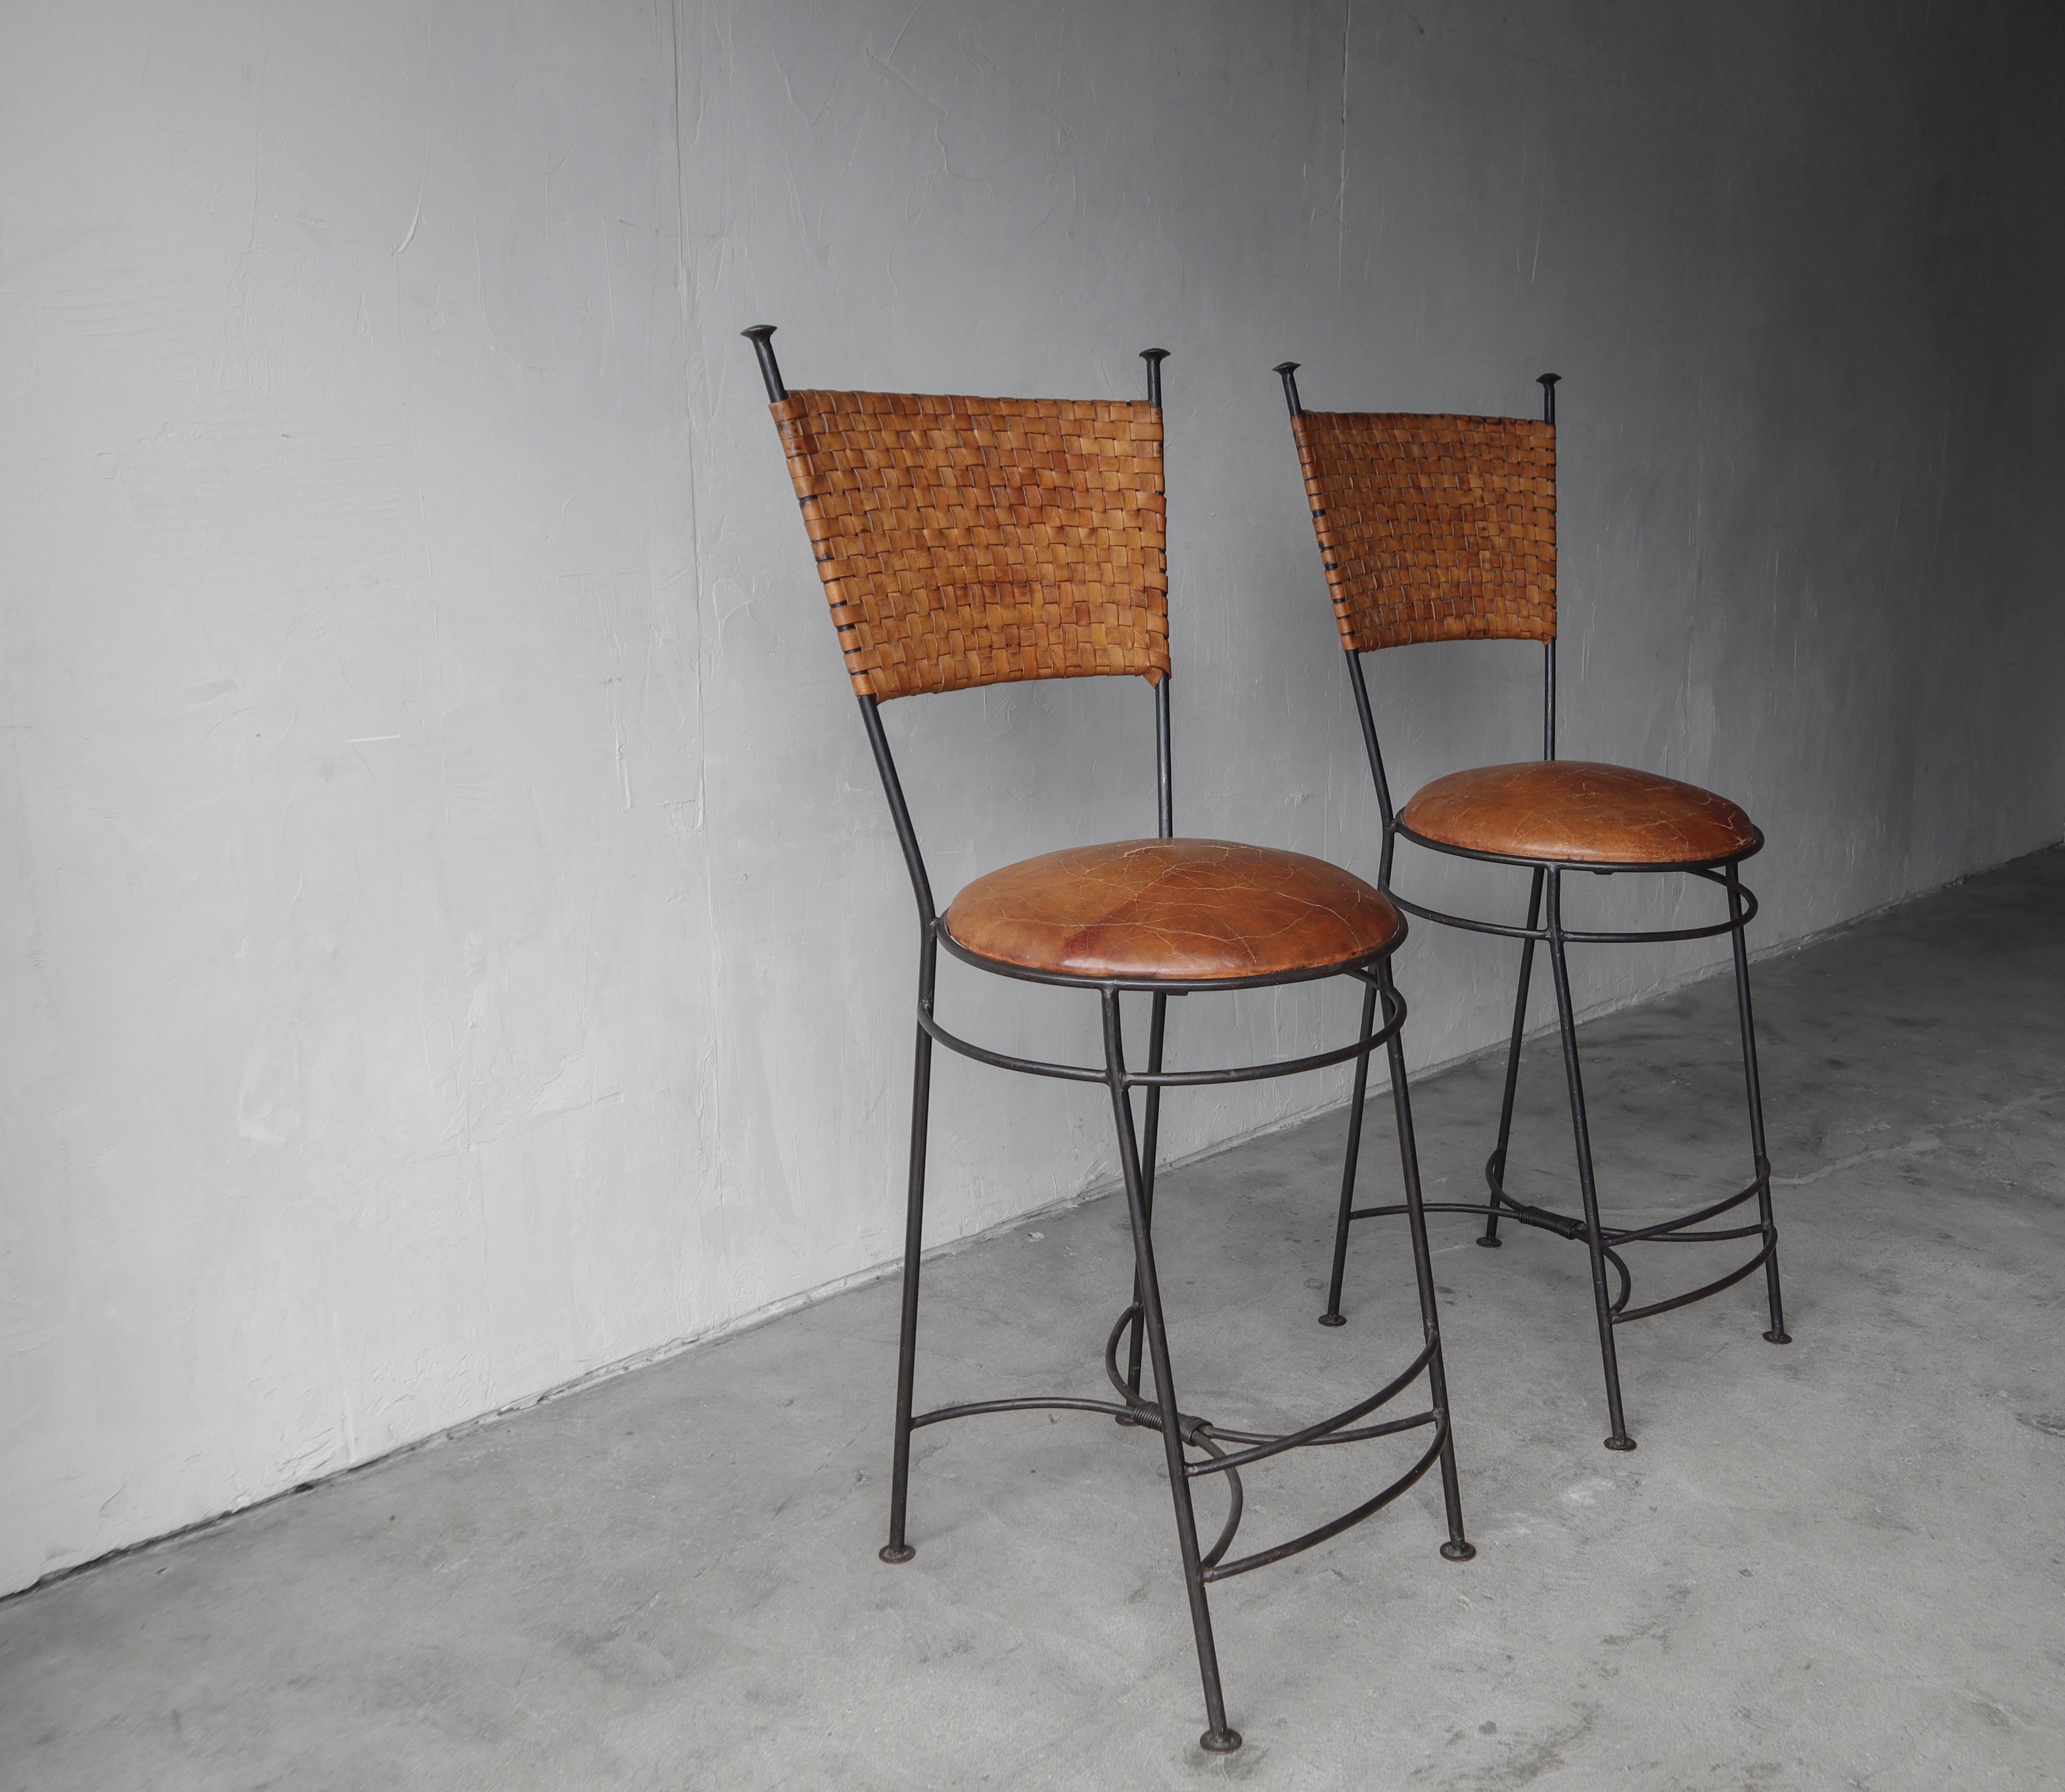 Oversized Vintage Woven Leather and Iron Bar Stools - A Pair In Good Condition For Sale In Las Vegas, NV